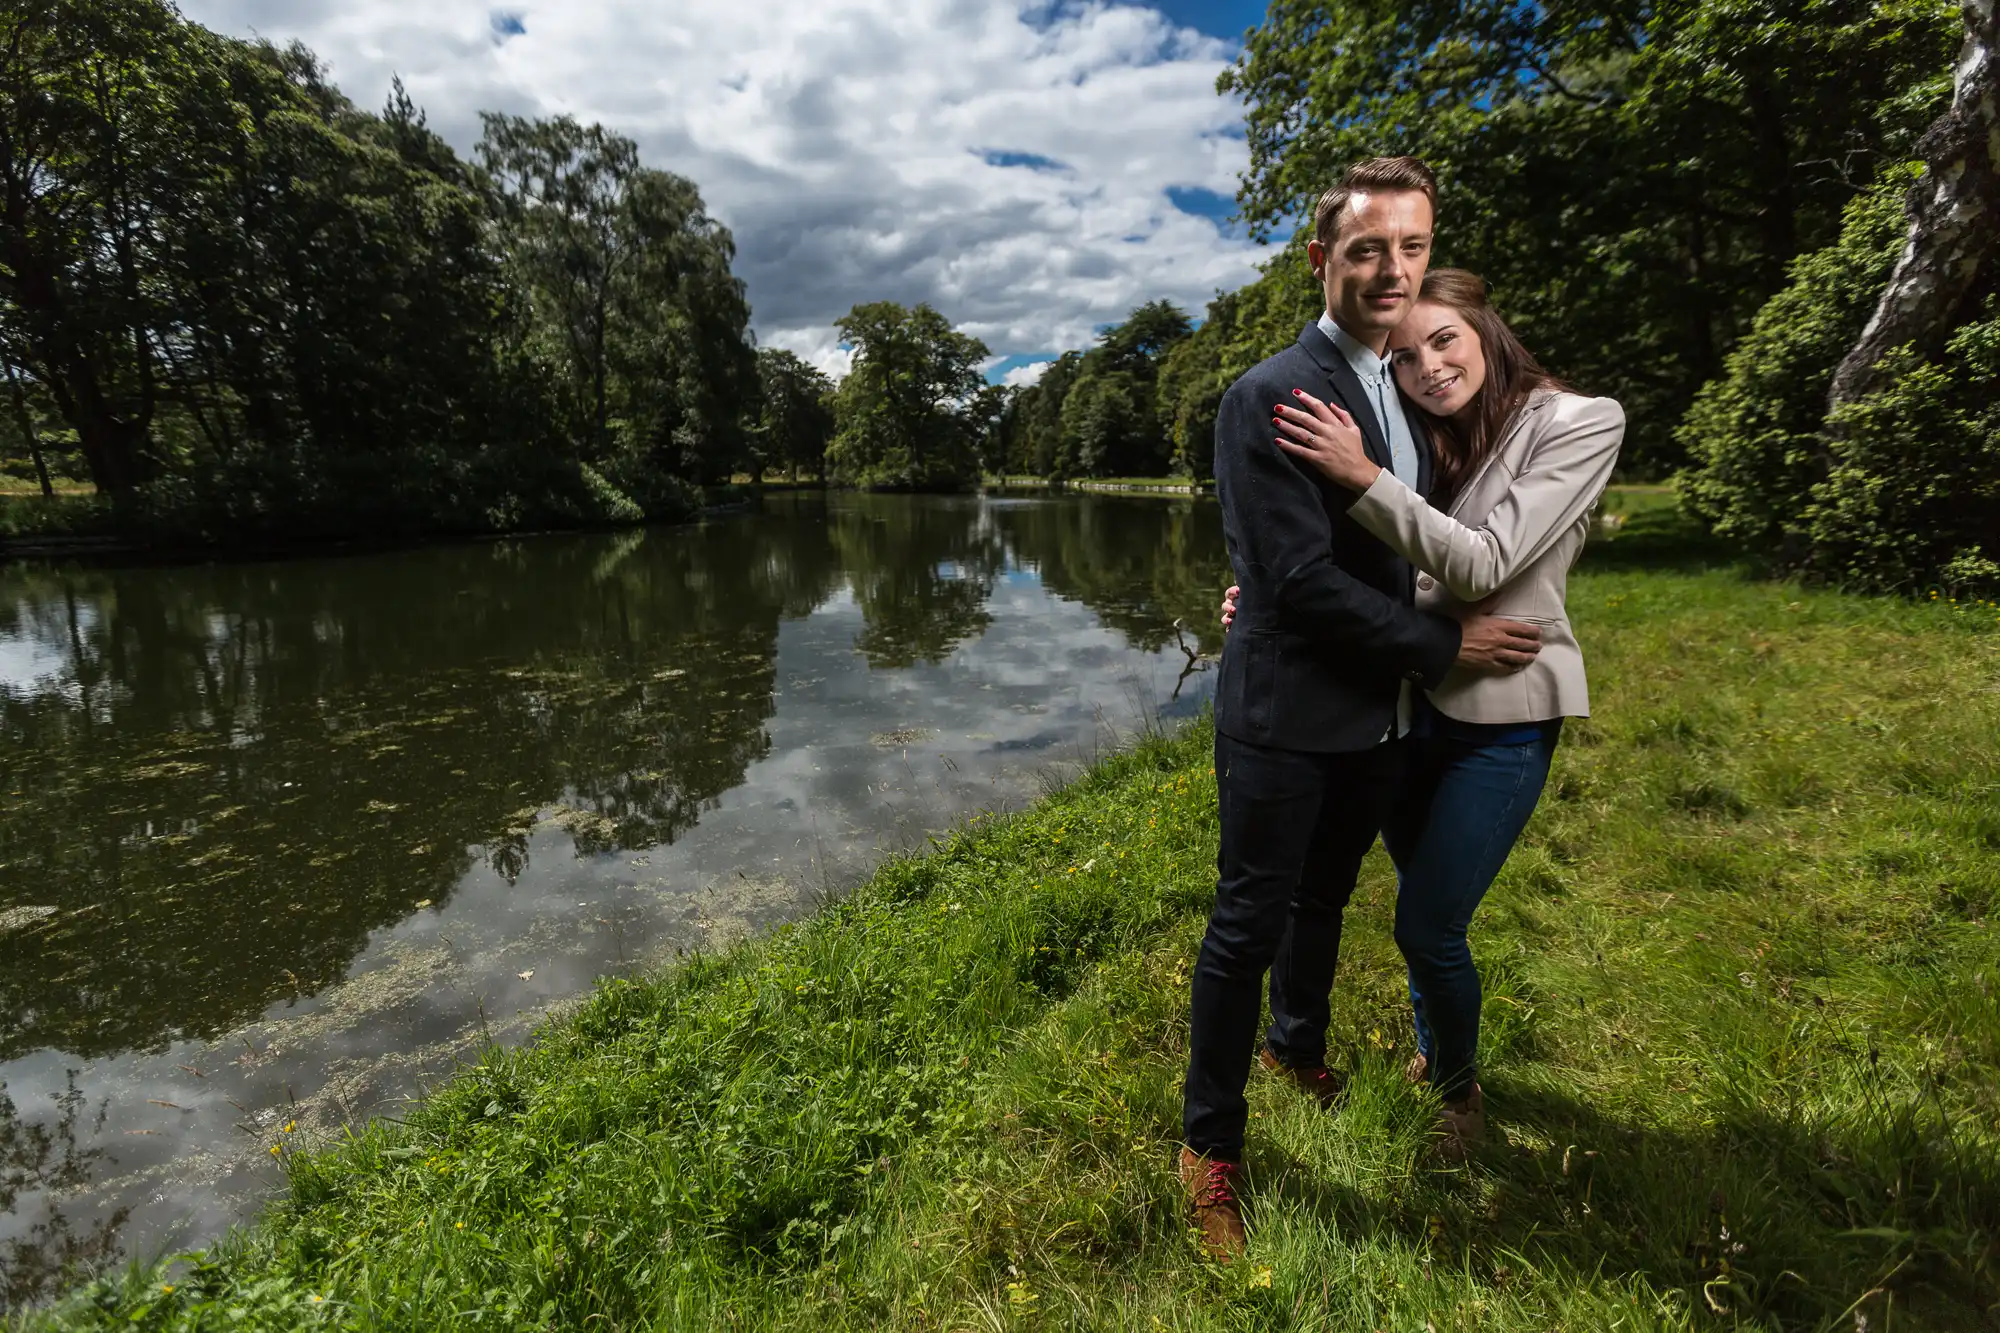 A couple embracing near a serene river surrounded by lush greenery under a cloudy sky.